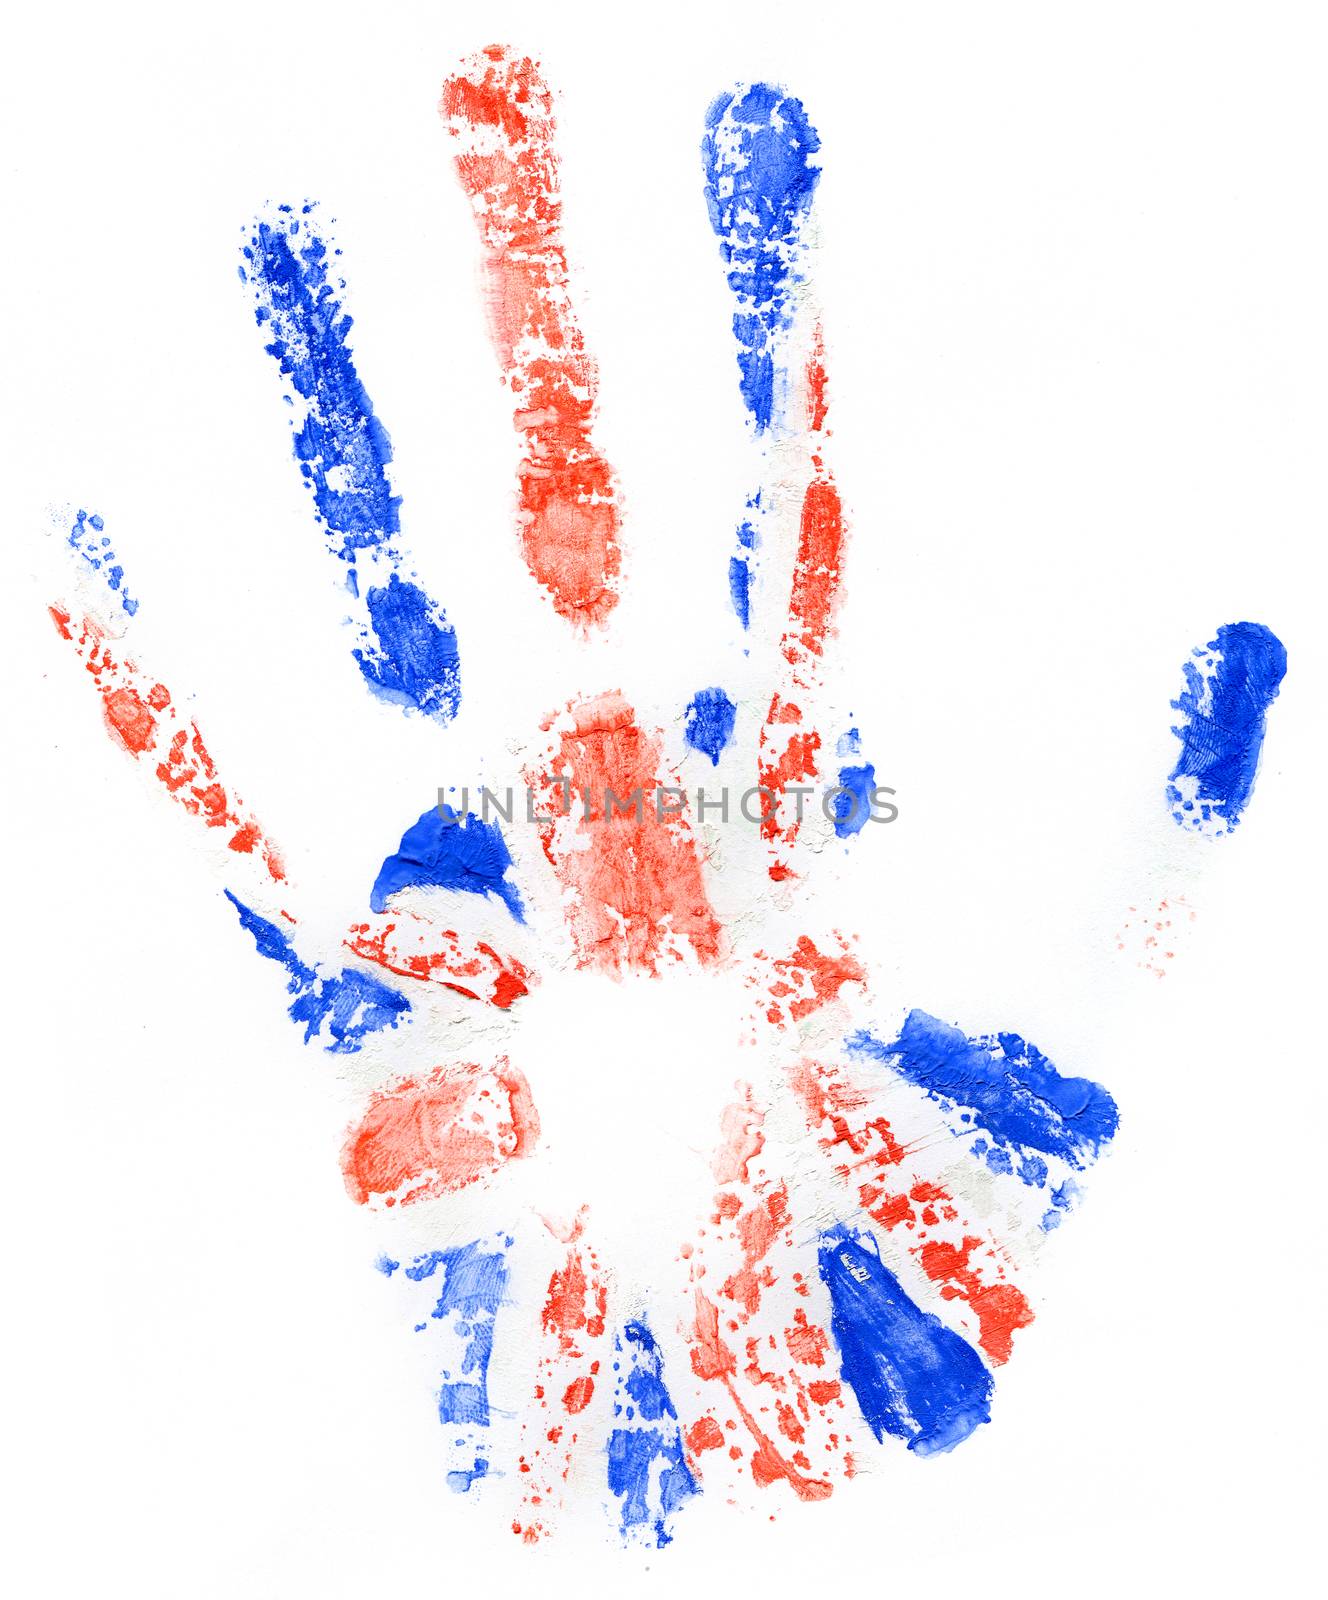 Handprint of a Great Britan flag on a white by vlad_star